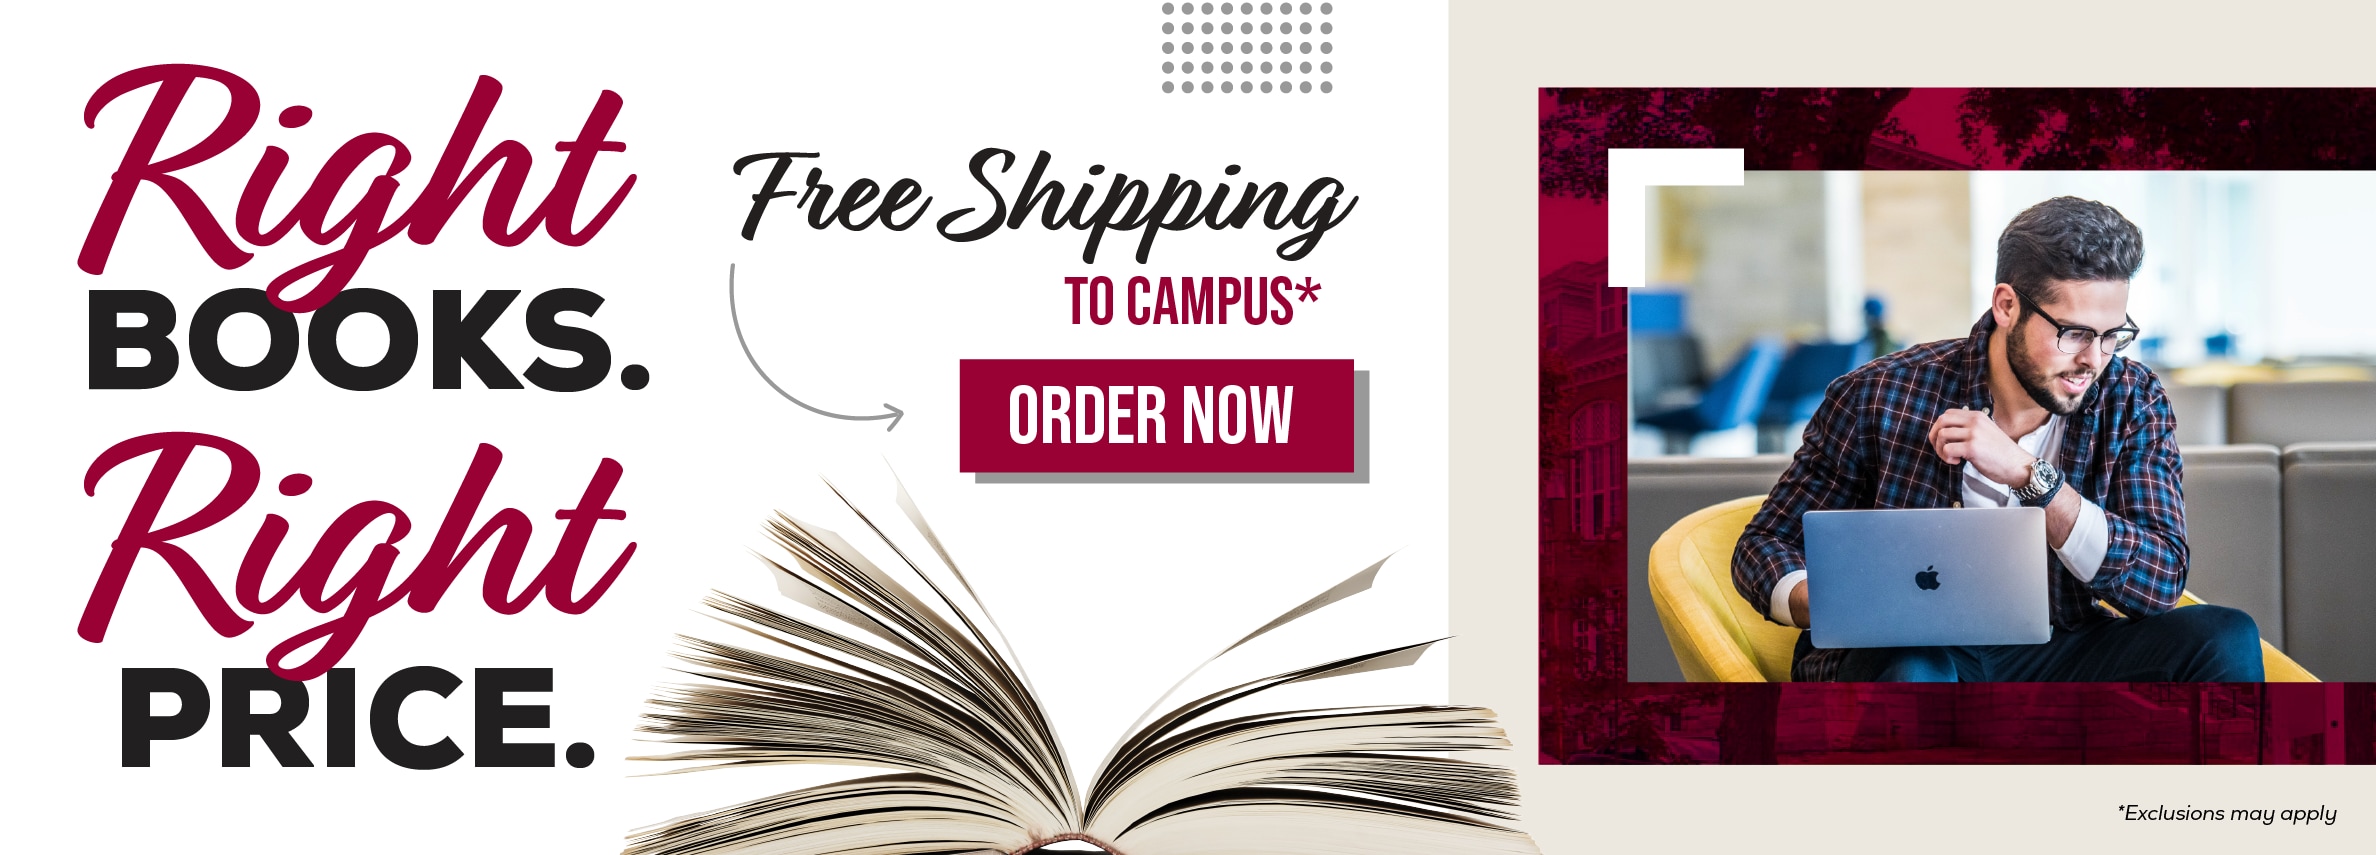 Right books. Right price. Free shipping to campus.* Order now. *Exclusions may apply.